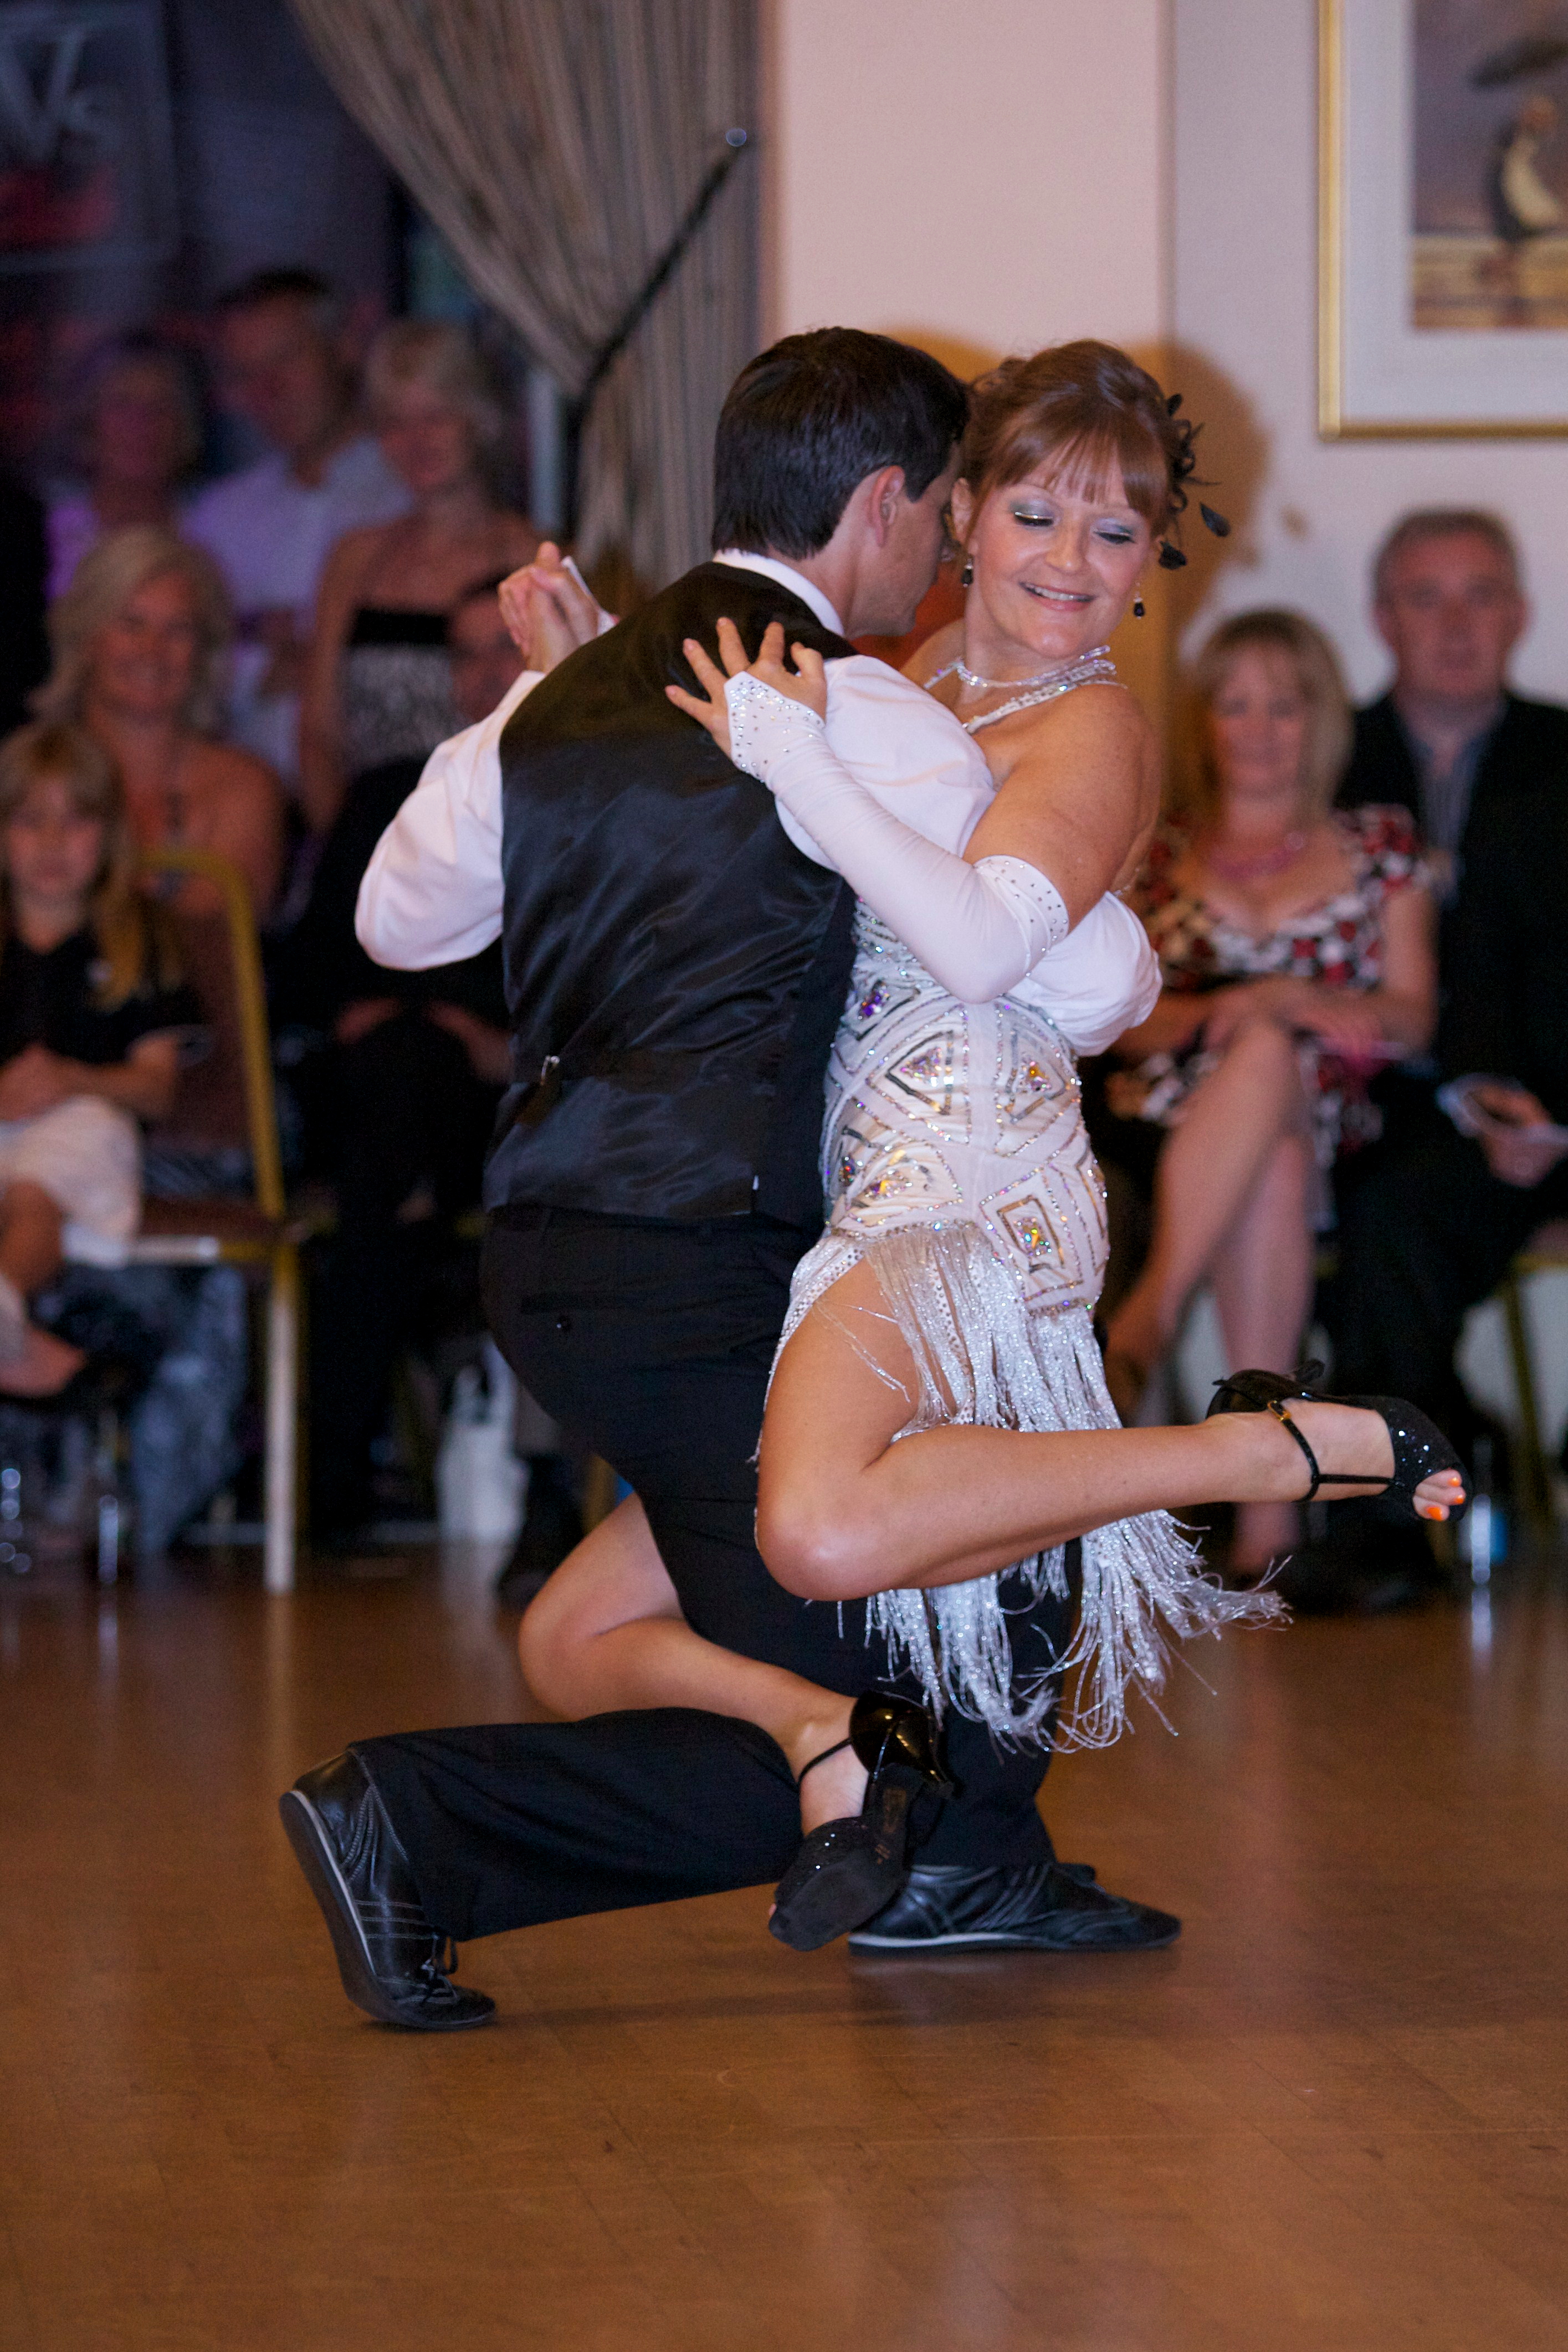 Taken while performing the Argentine Tango at 'Business Come Dancing', which I foolishly entered in 2012 but loved the dance... though lots to say about my partner... just not here.